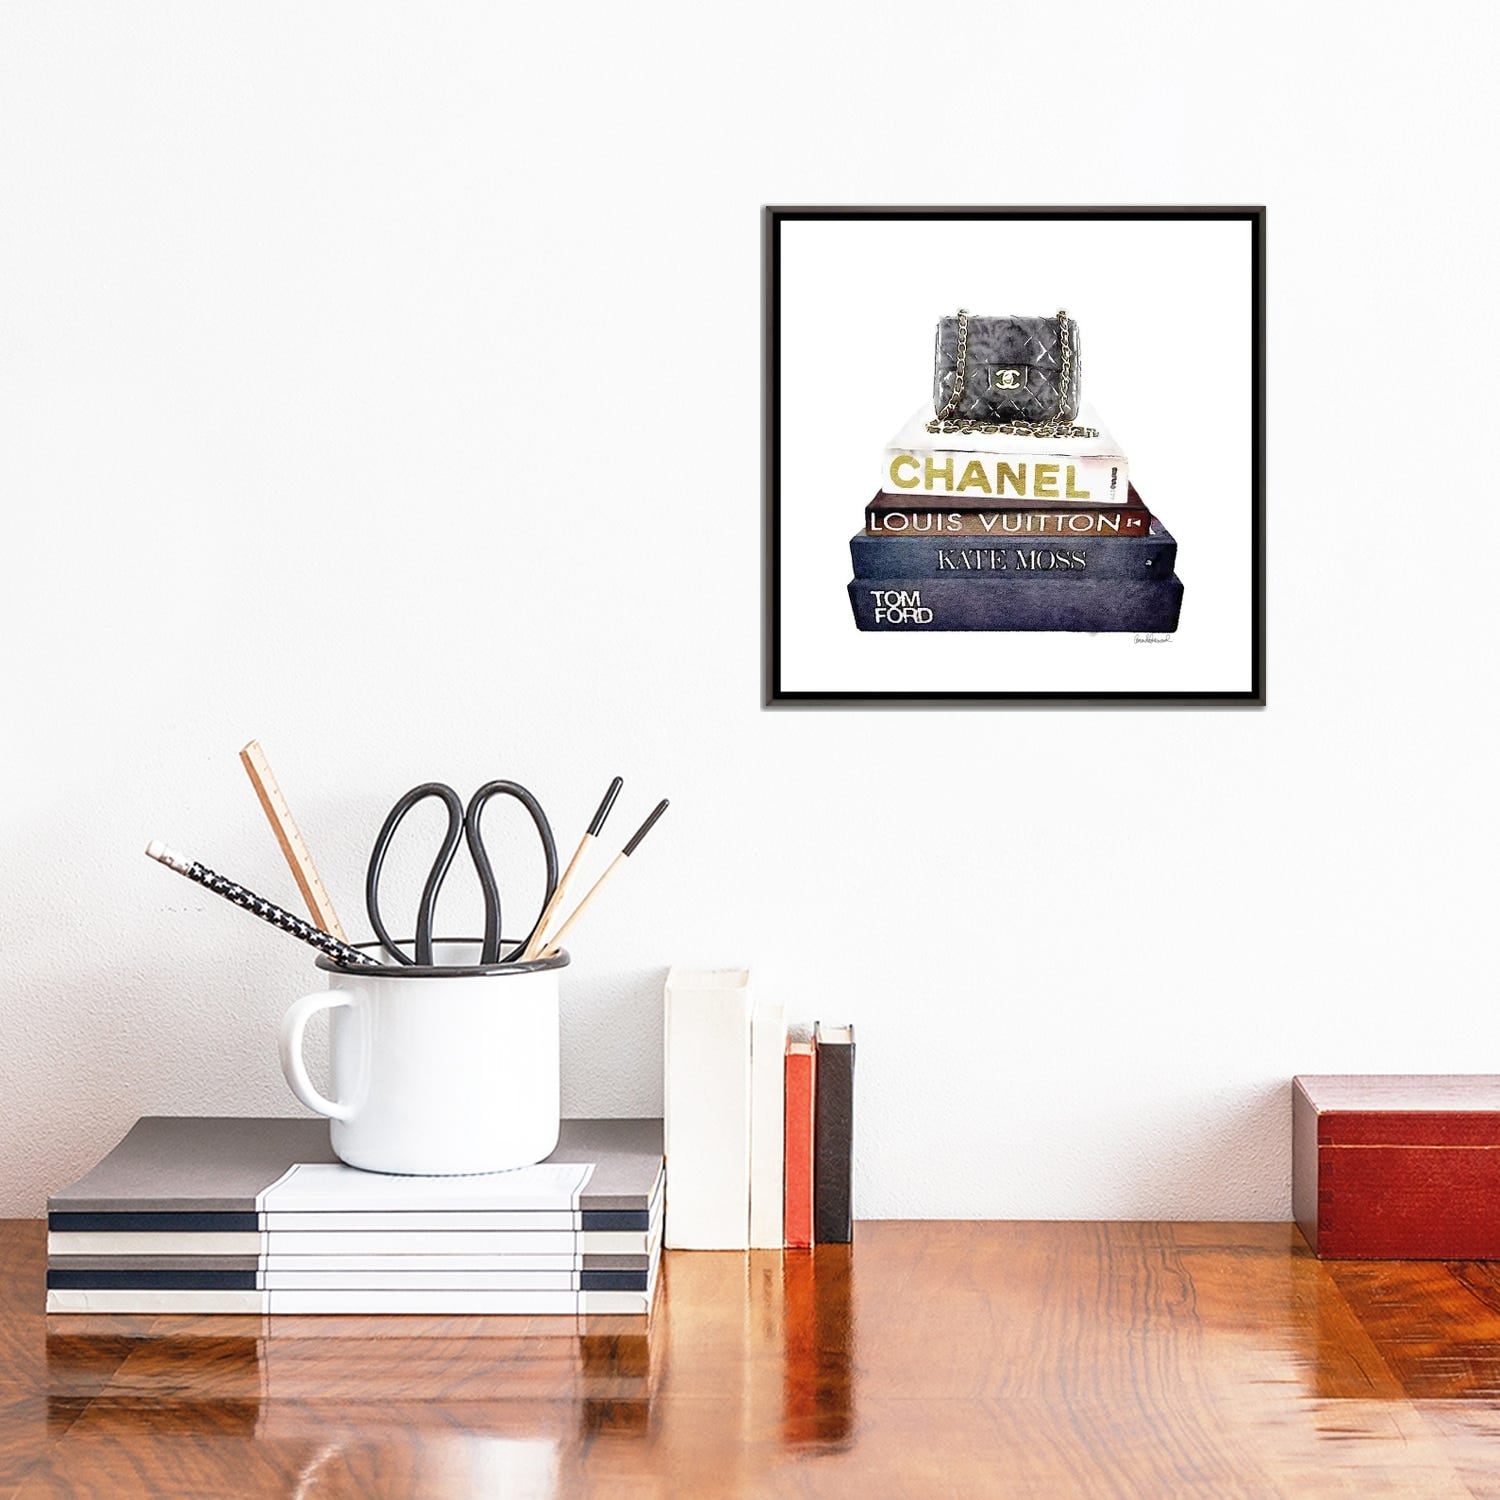 Framed Poster Prints - Stack of Fashion Books with A Chanel Bag by Amanda Greenwood ( Fashion > Fashion Brands > Chanel art) - 24x24x1